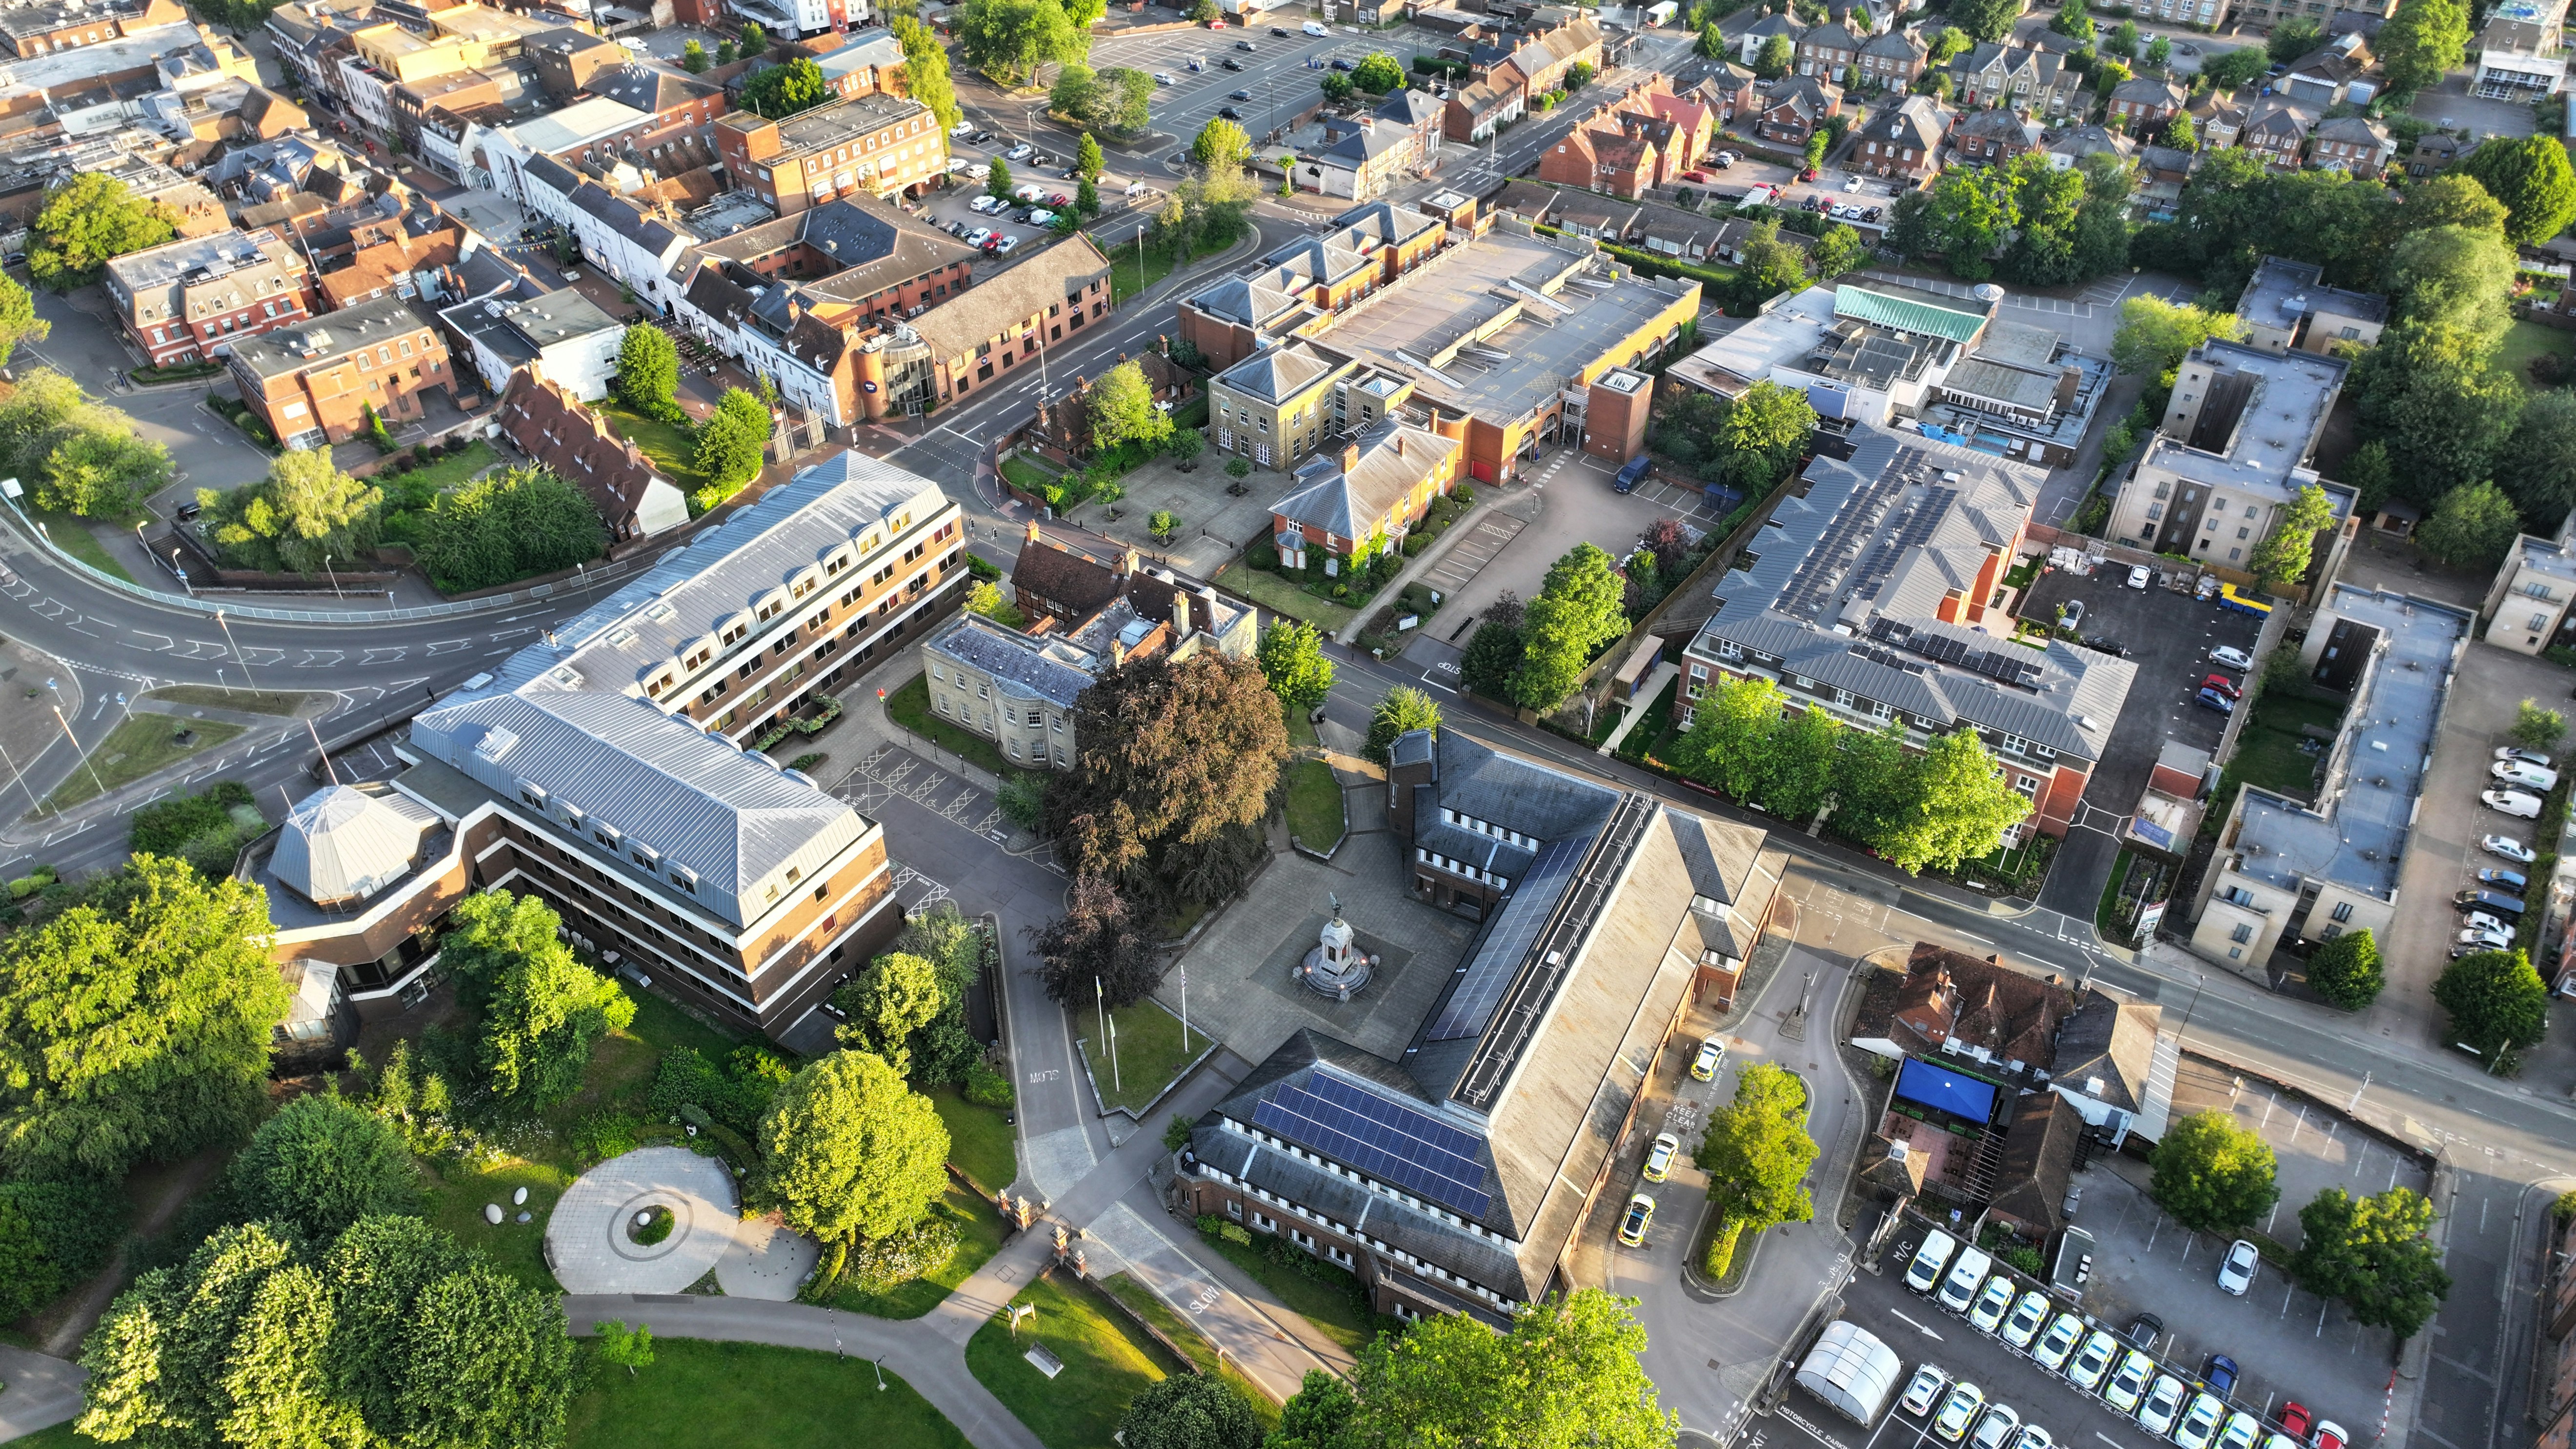 The civic campus from the air